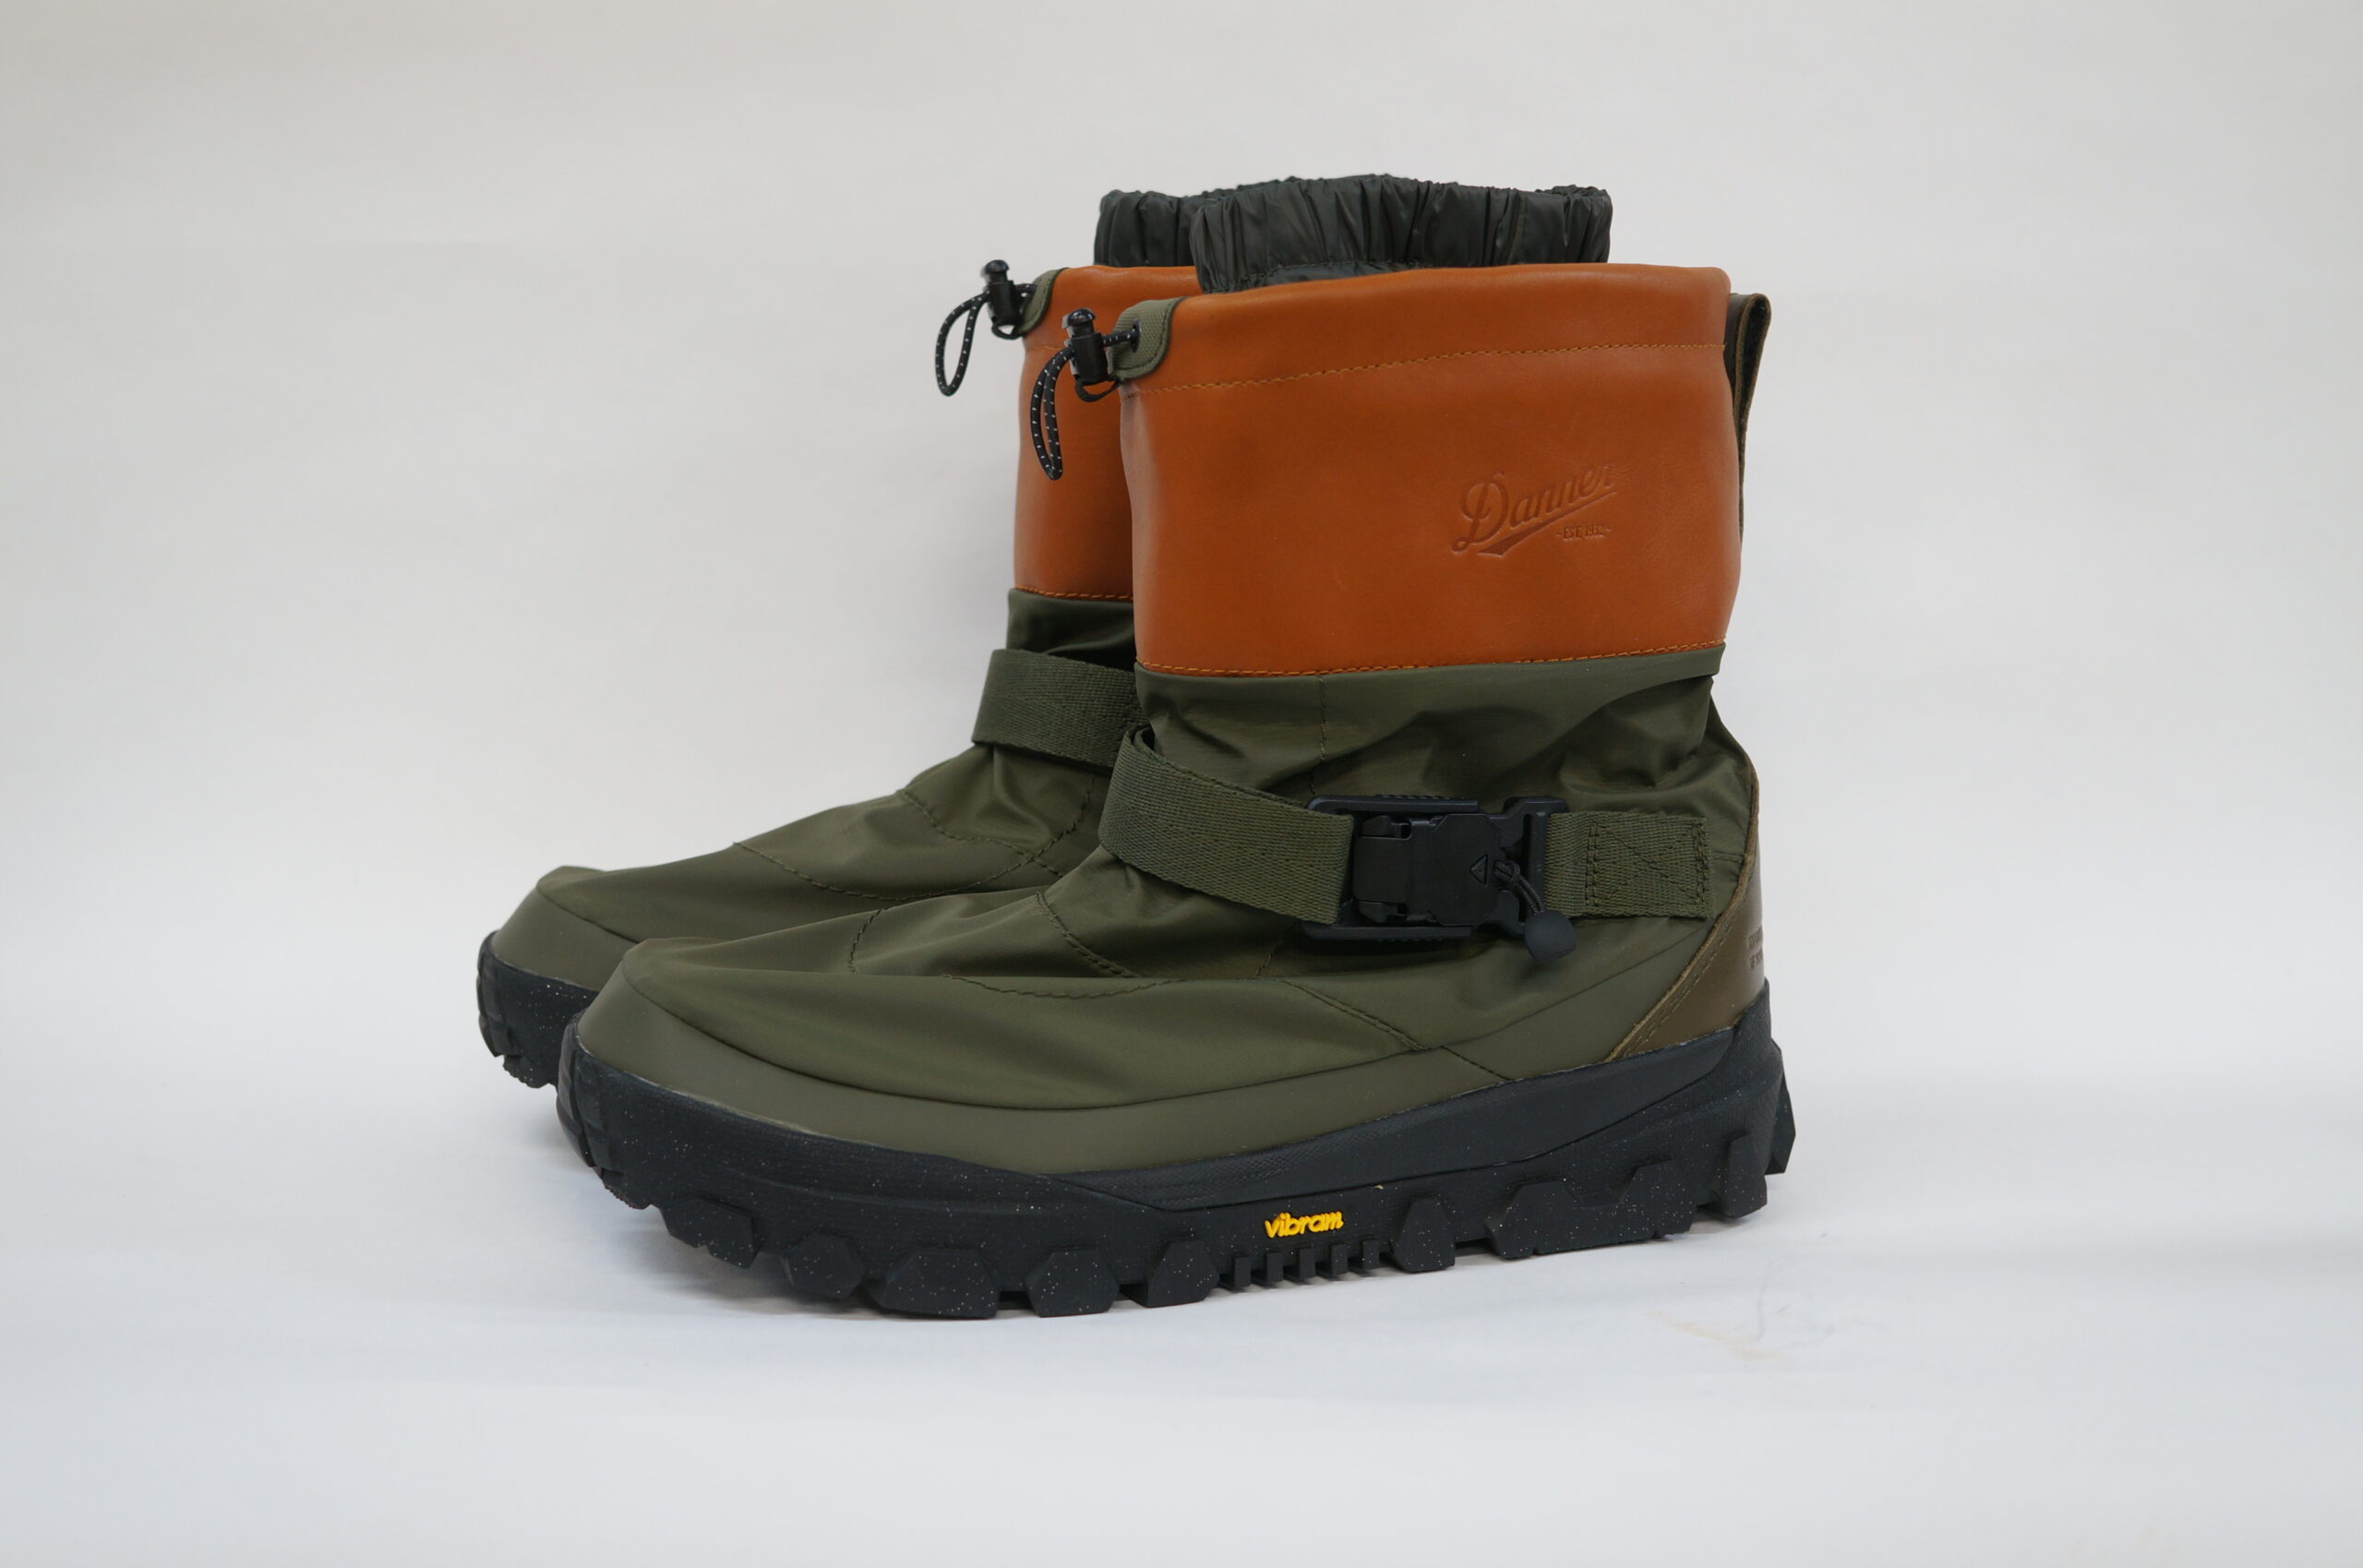 DANNER x NANGA SPECIAL PACK | COLLABORATION